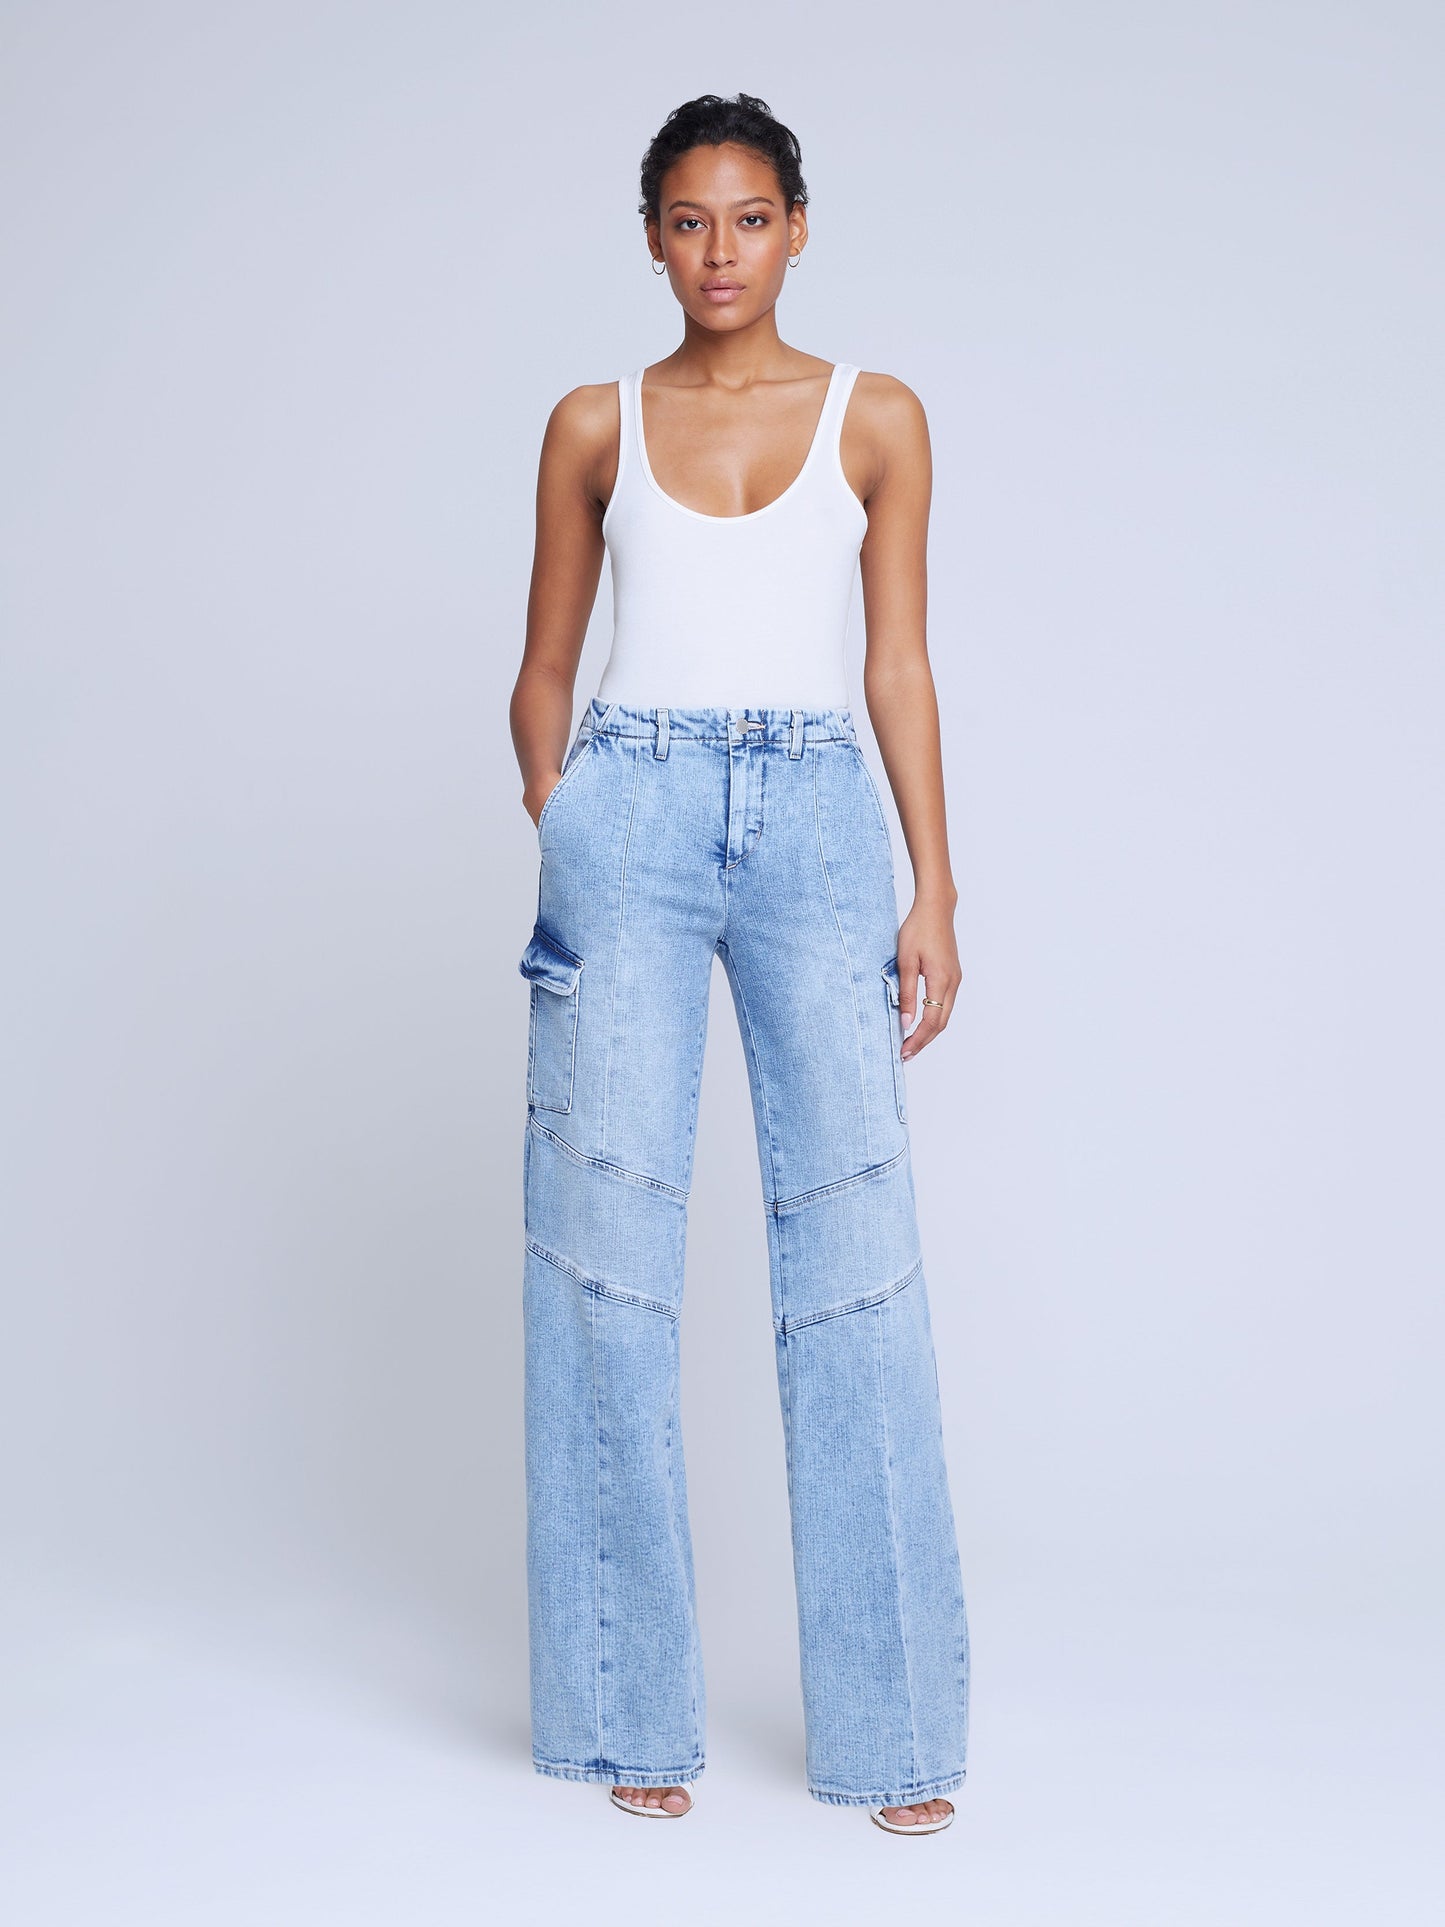 Lagence Brooklyn Utility Jeans